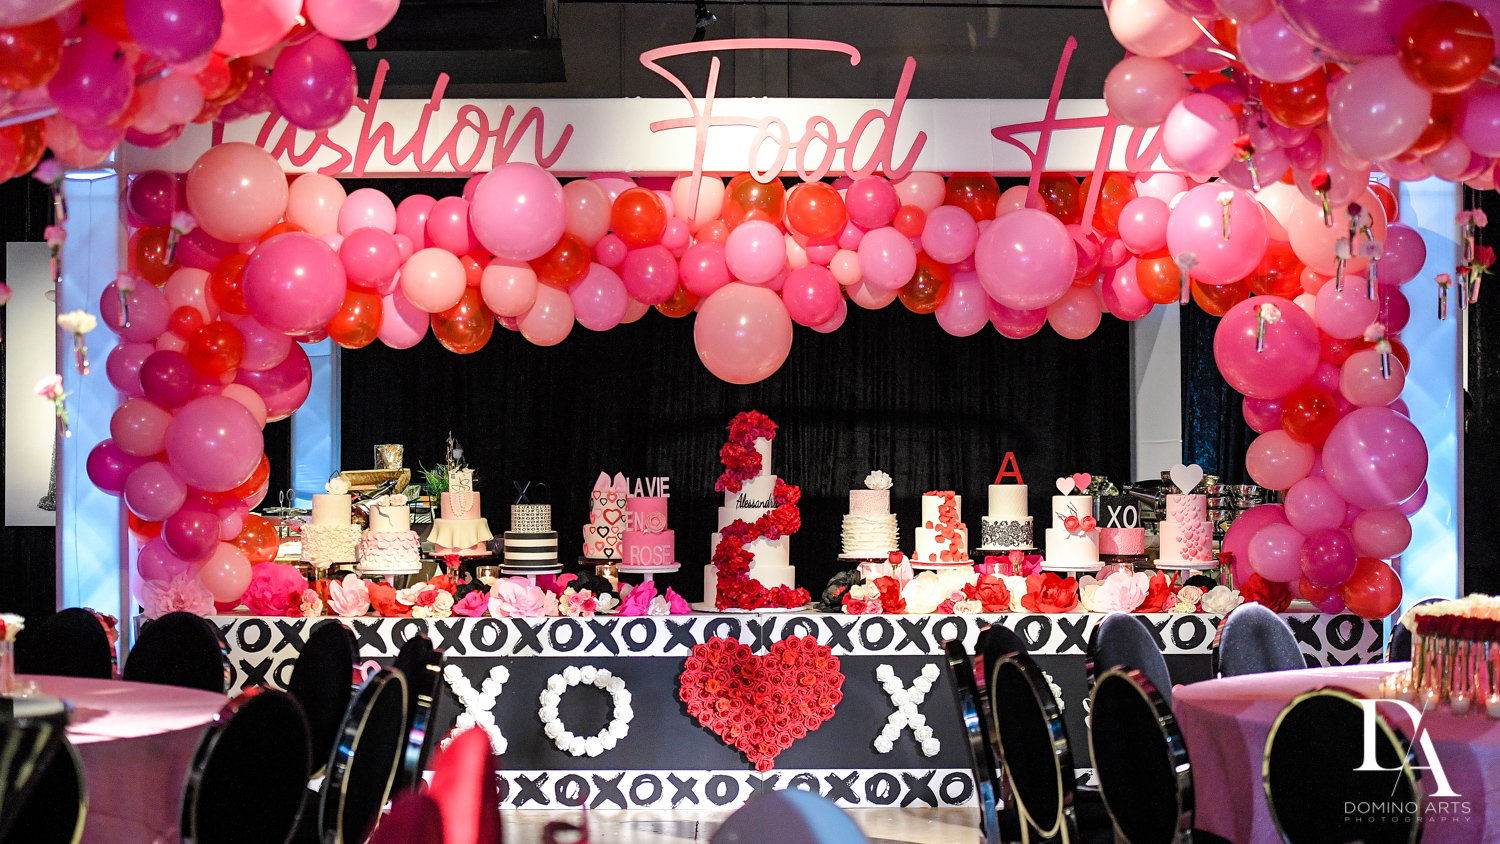 best party decor at Fashion Theme Bat Mitzvah at Gallery of Amazing Things by Domino Arts Photography